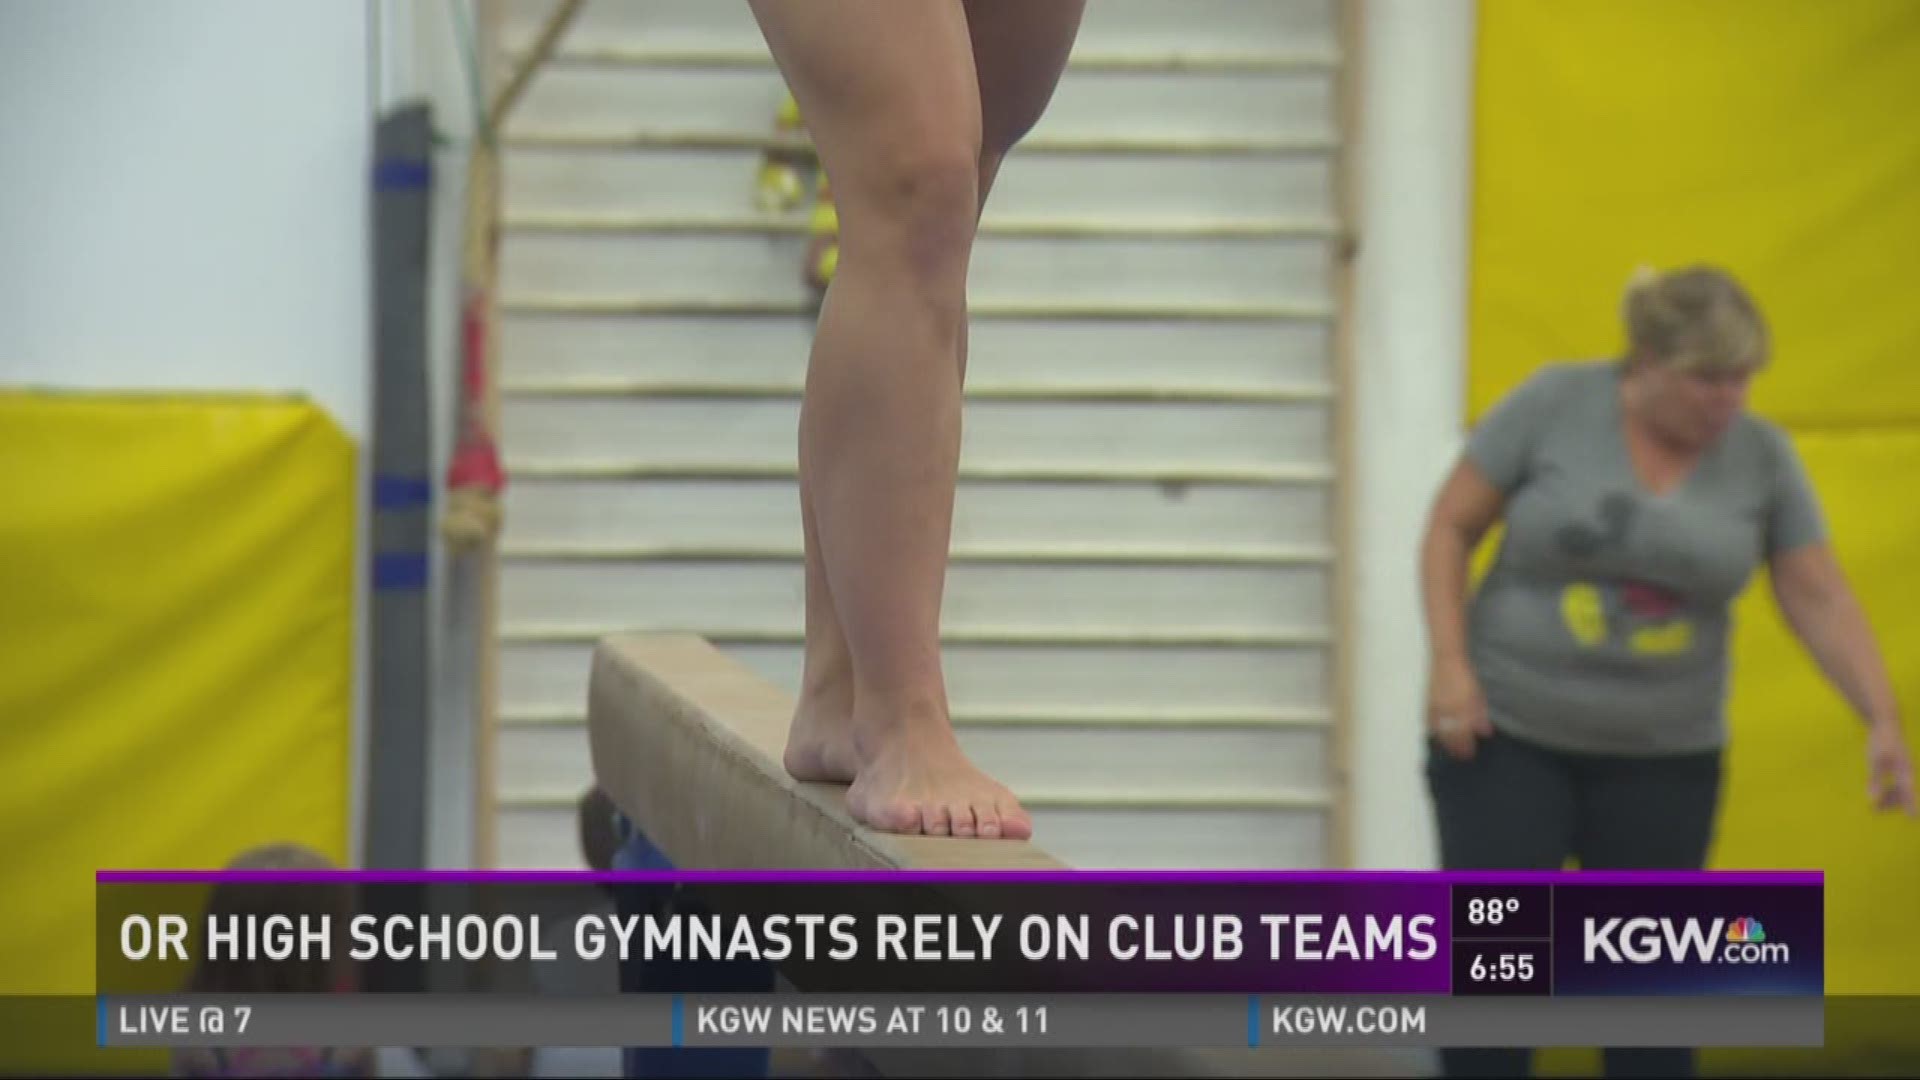 High school gymnasts rely on clubs